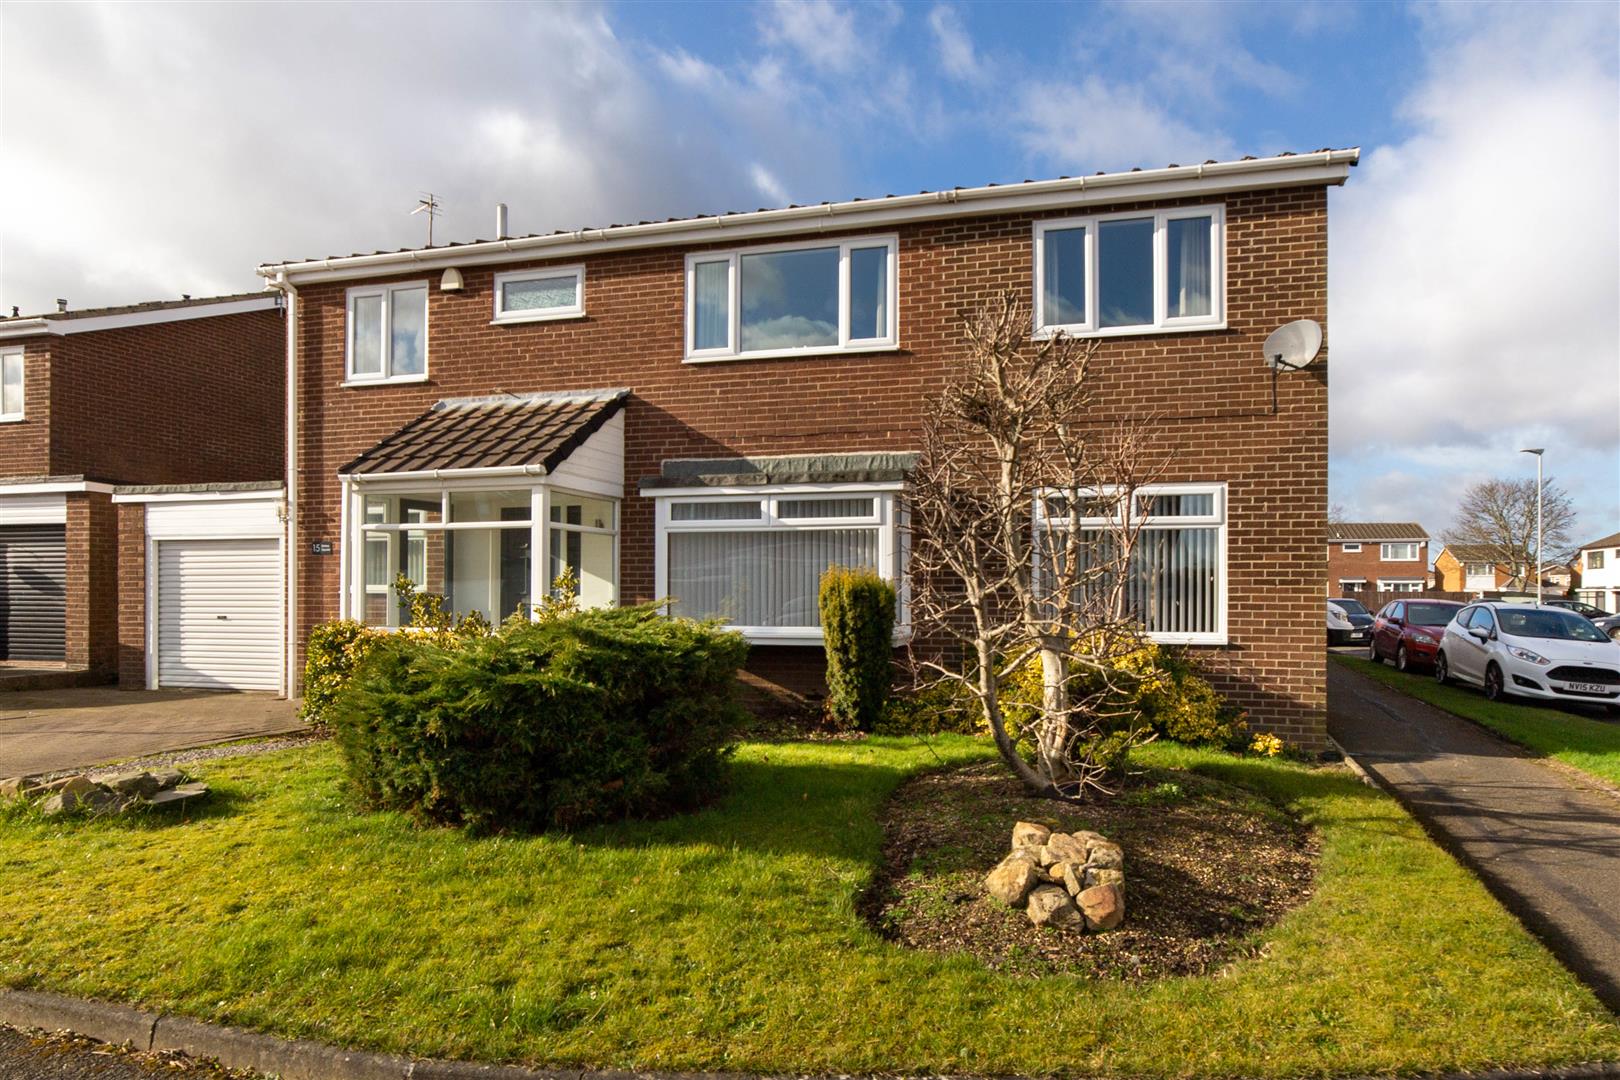 4 bed detached house for sale in Kinloss Square, Cramlington, NE23